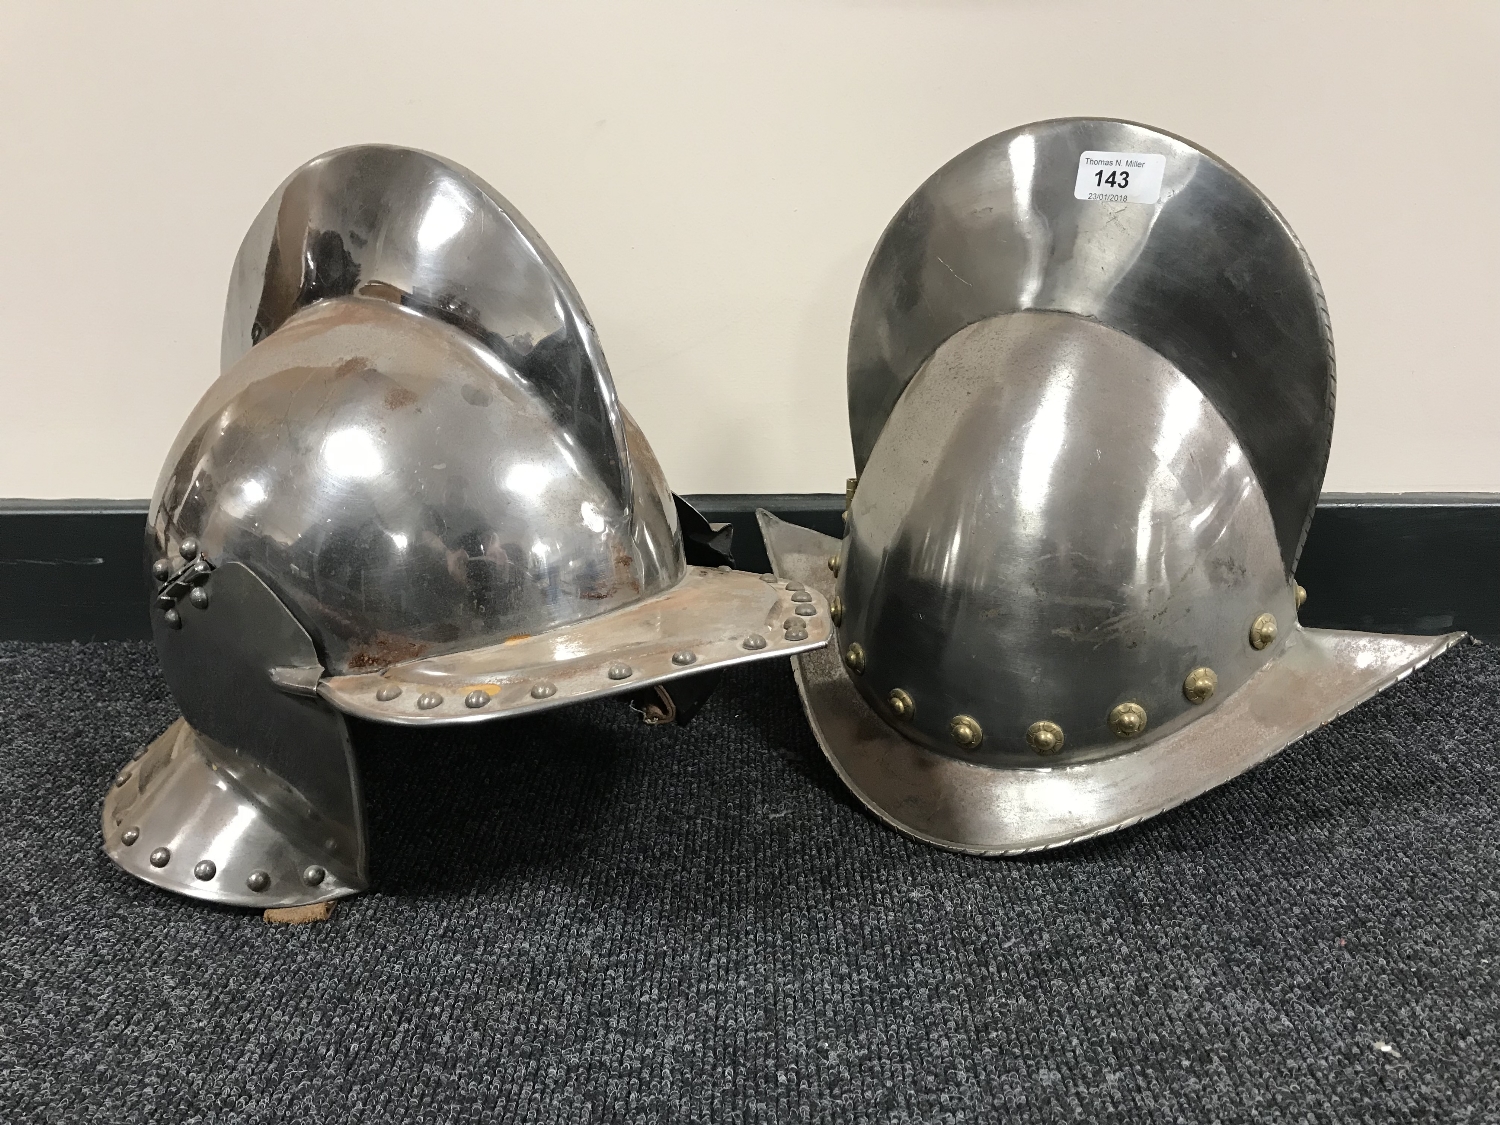 Two period style military helmets